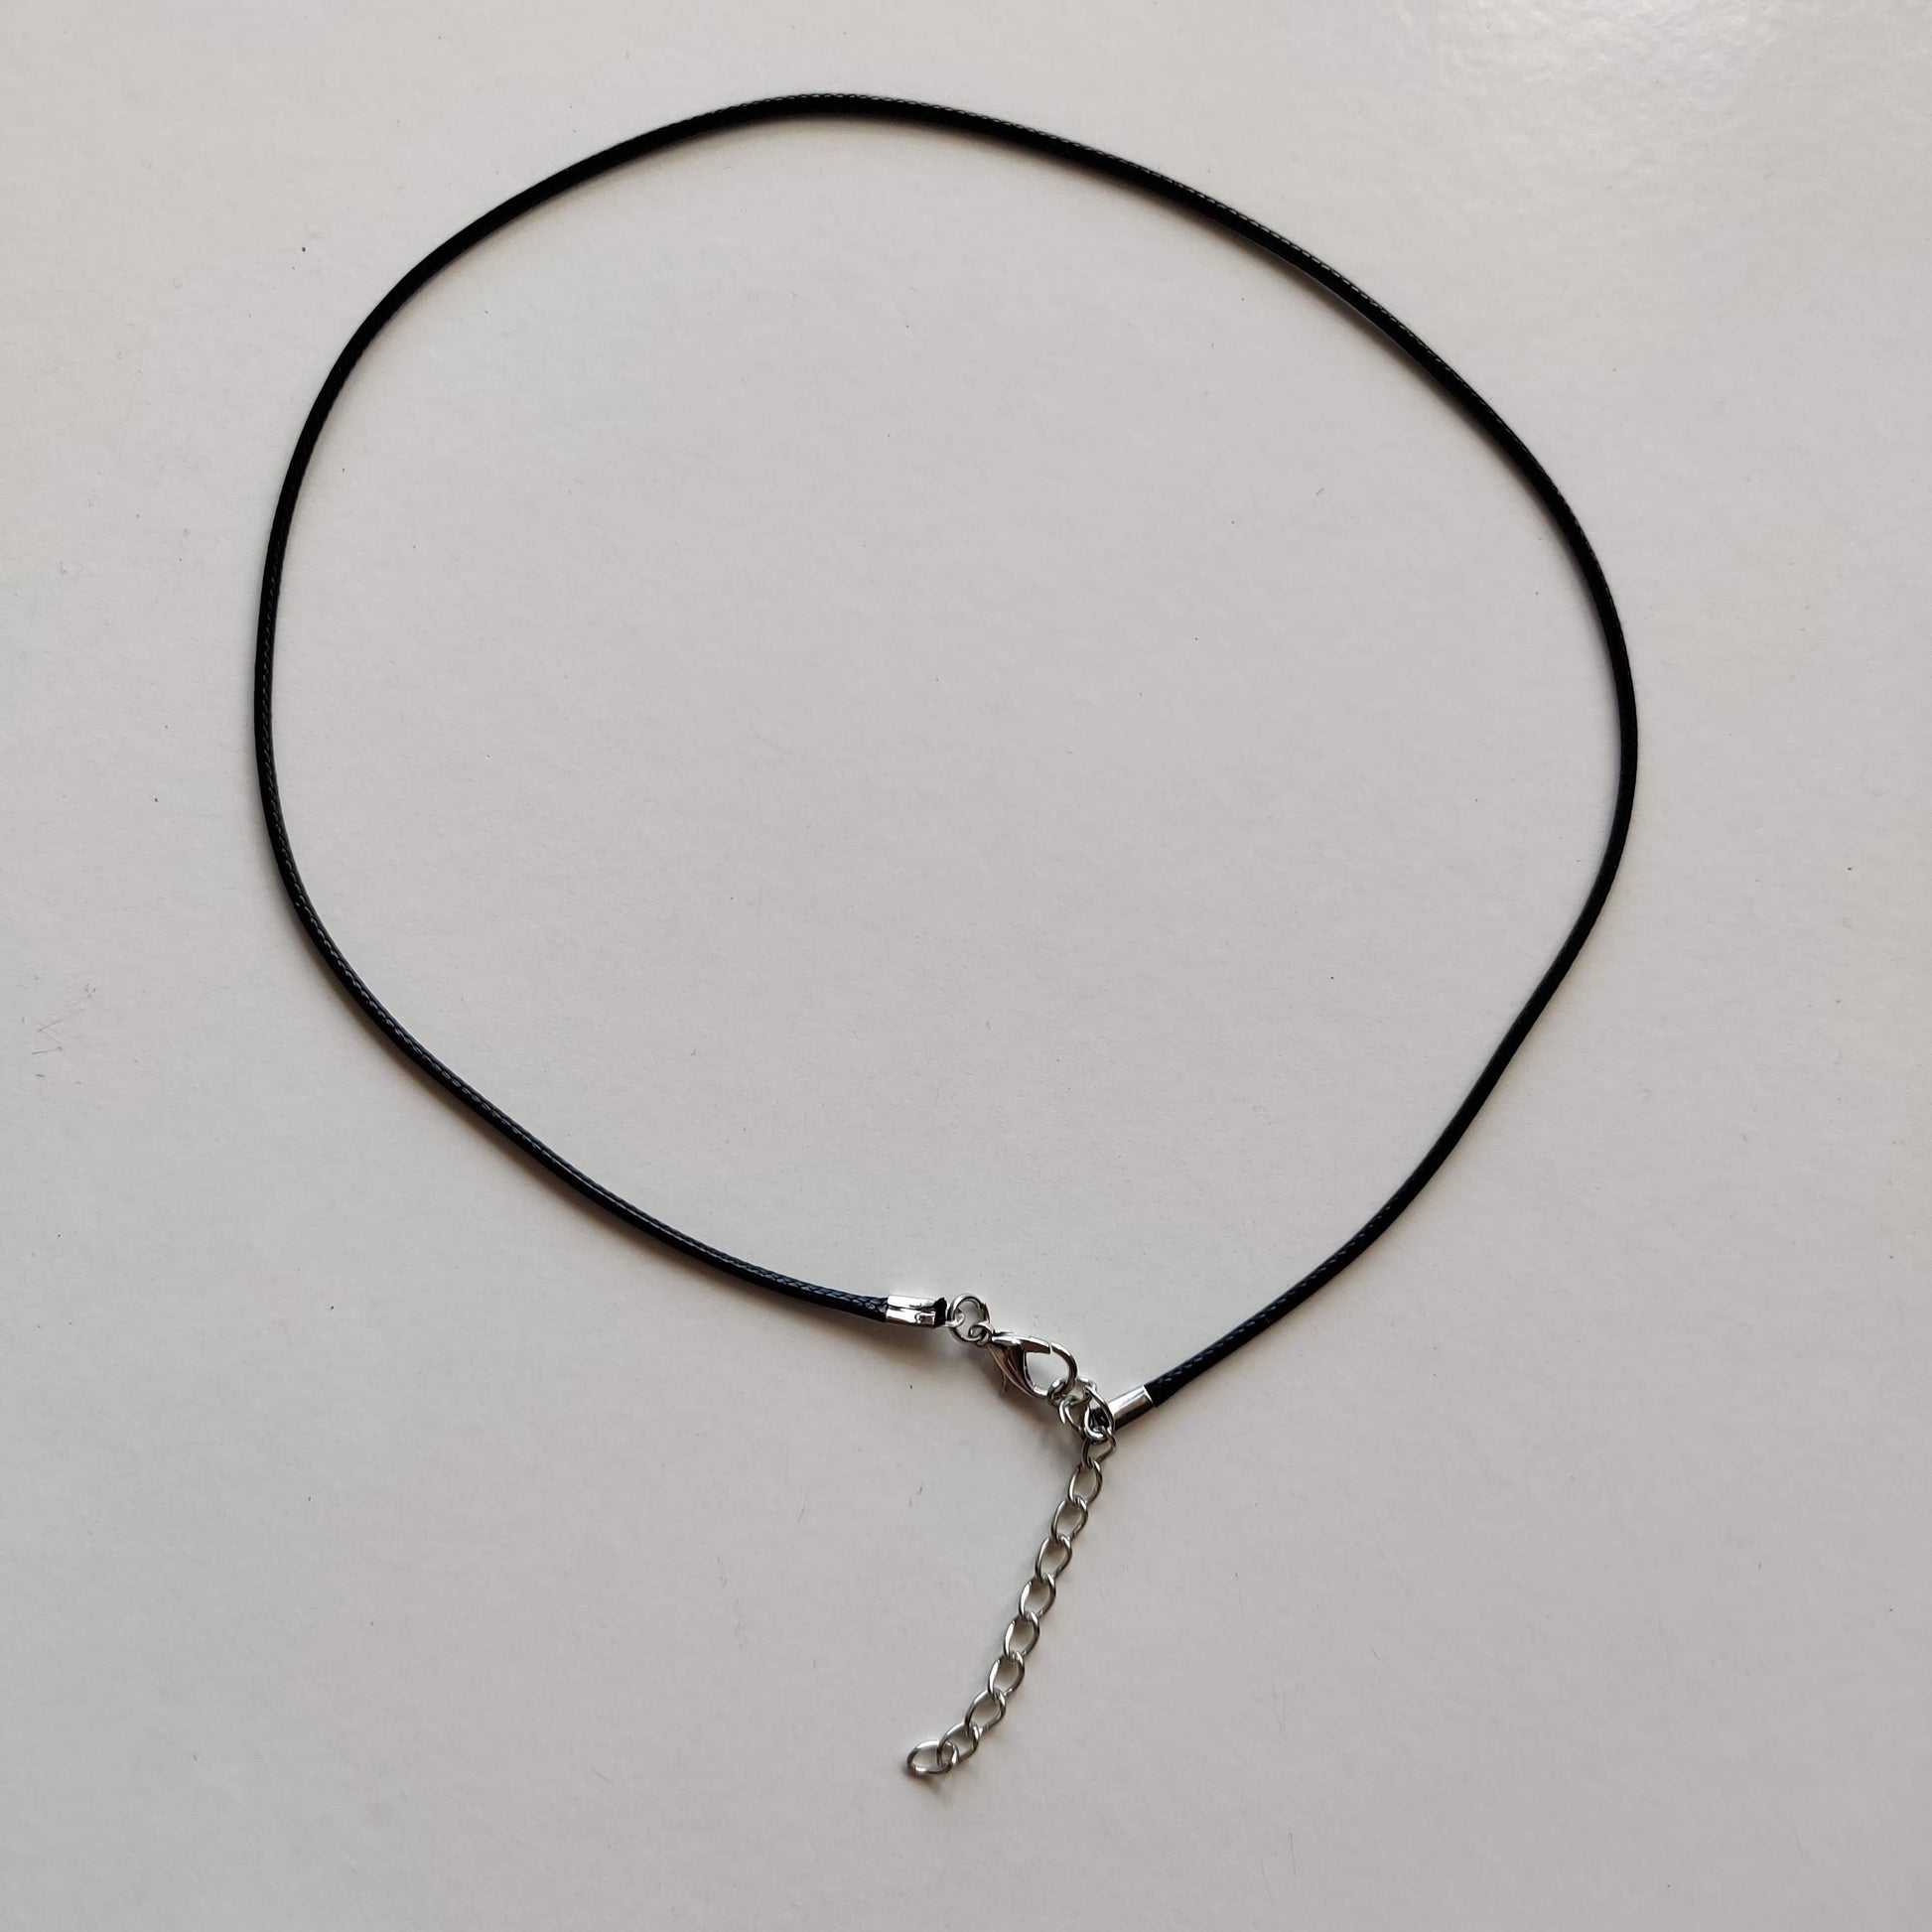 Waxed Card Necklace Chain with Lobster Clasp - Rivendell Shop